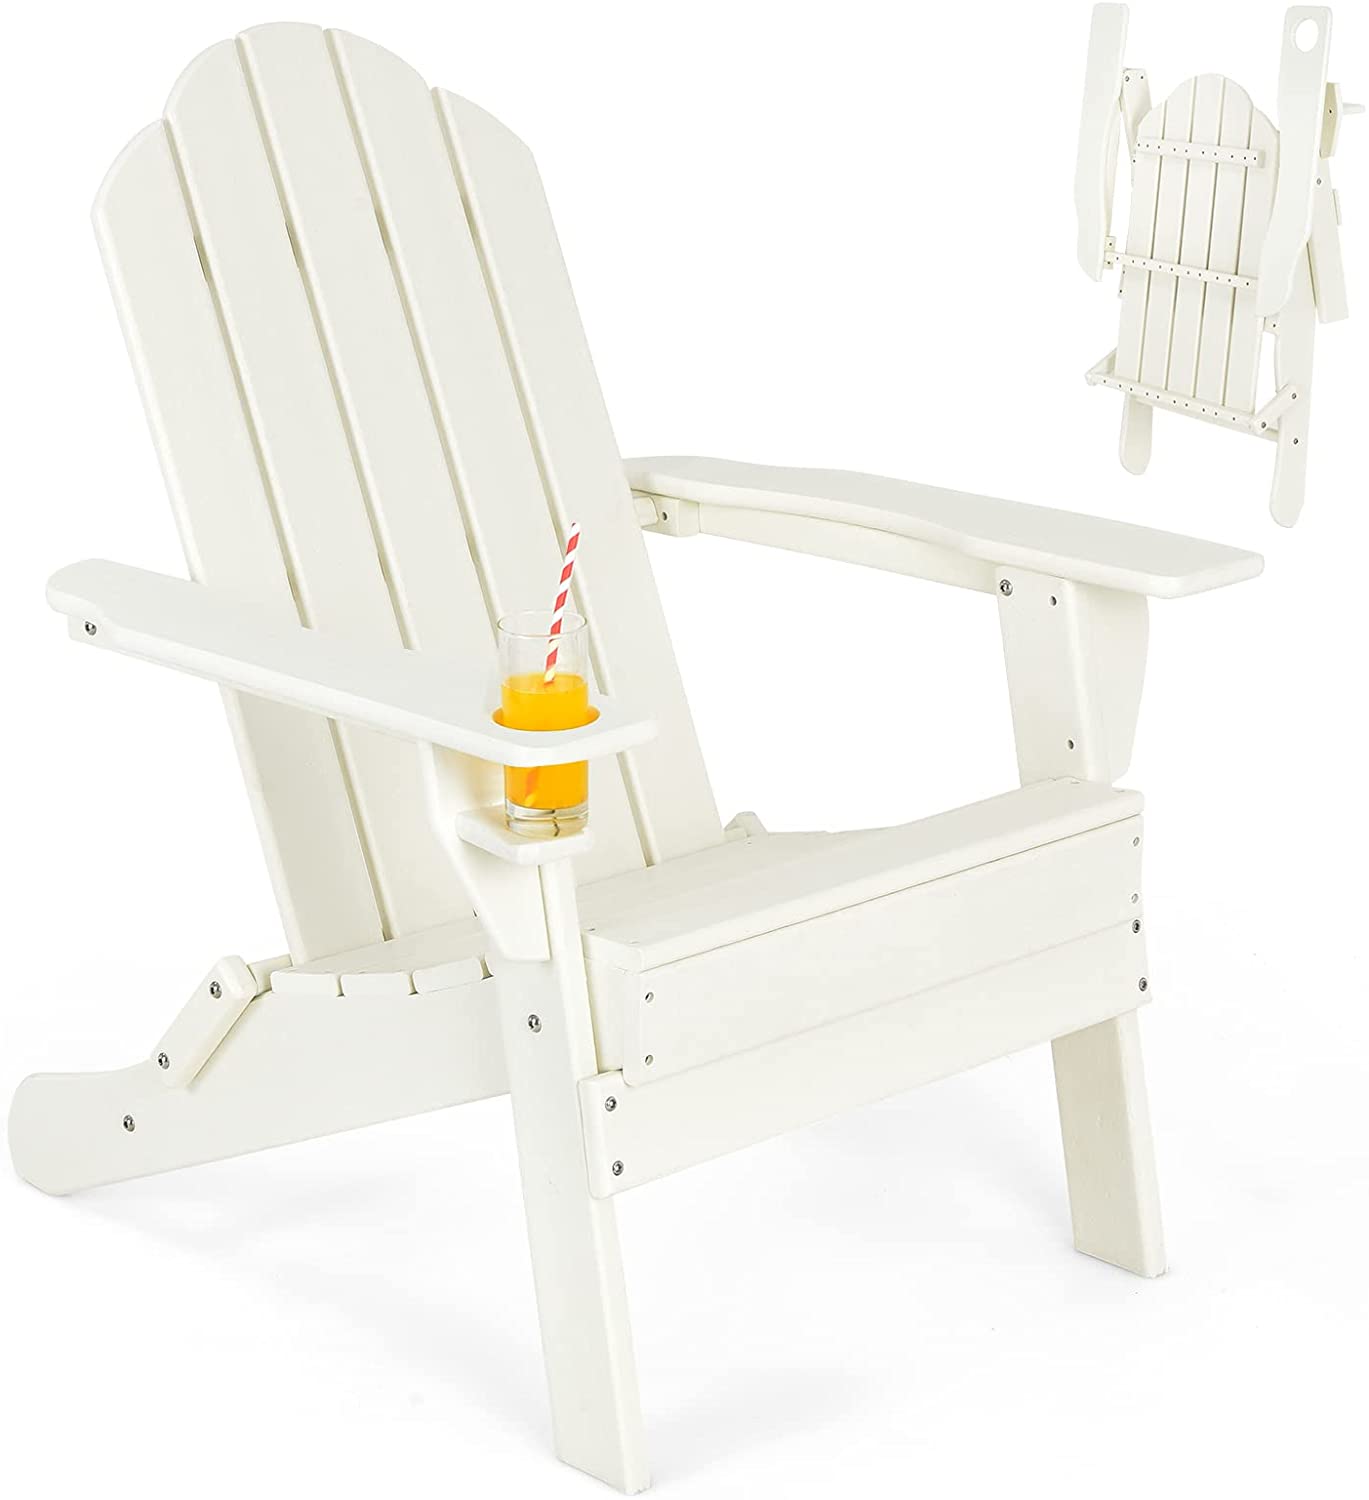 Adirondack Chair Outdoor Folding Chairs, Weather Resistant Patio Chair with Built-in Cup